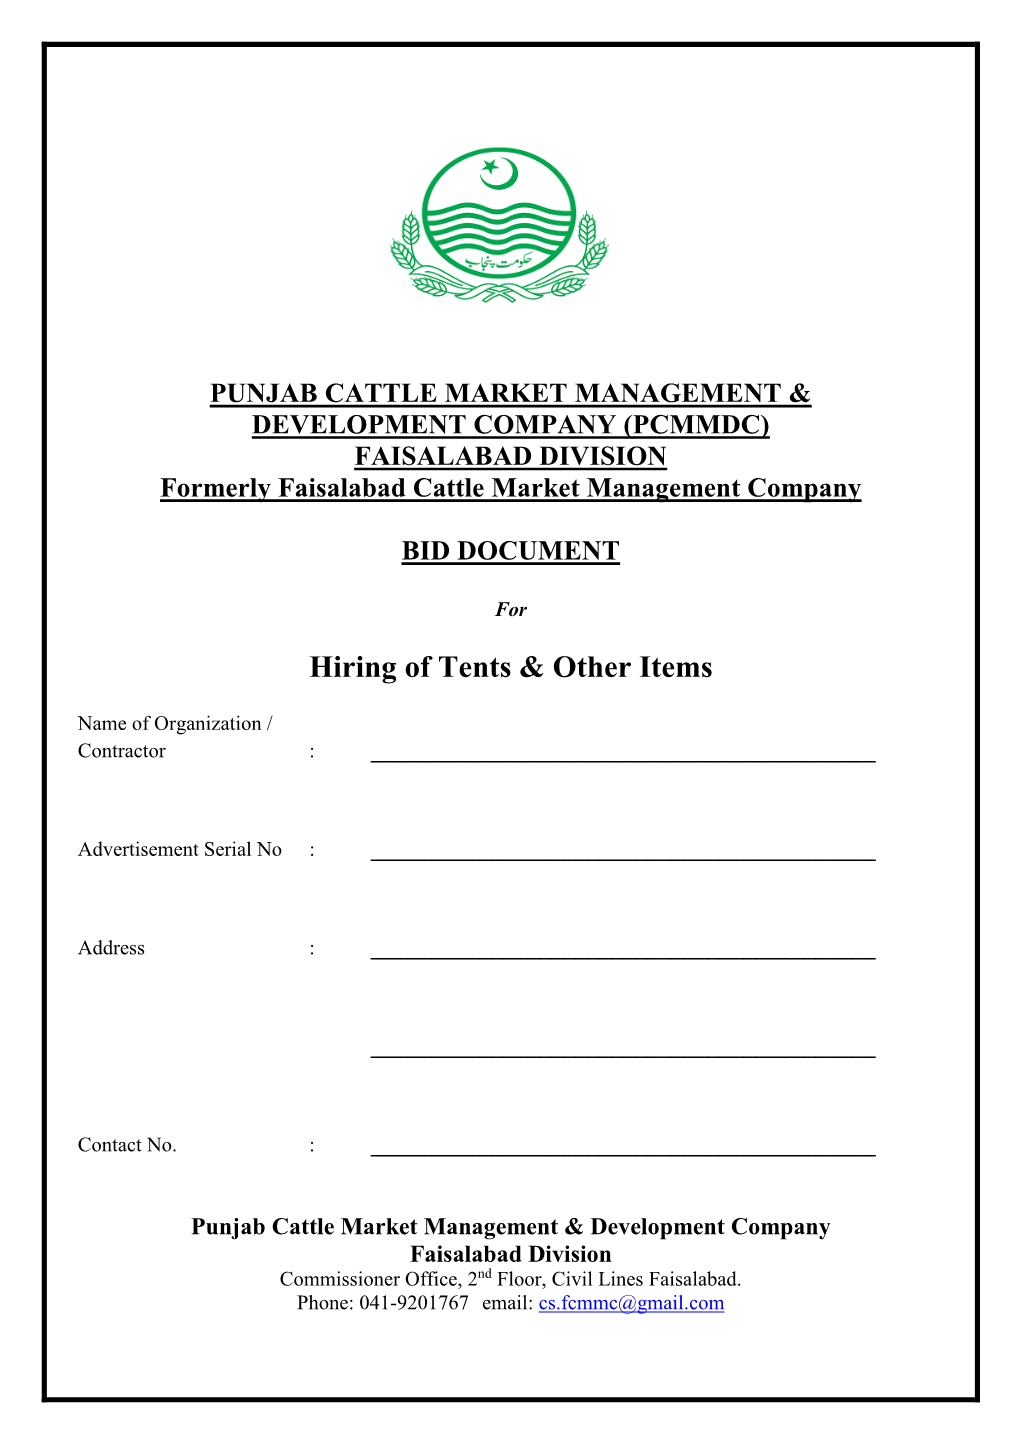 Hiring of Tents & Other Items